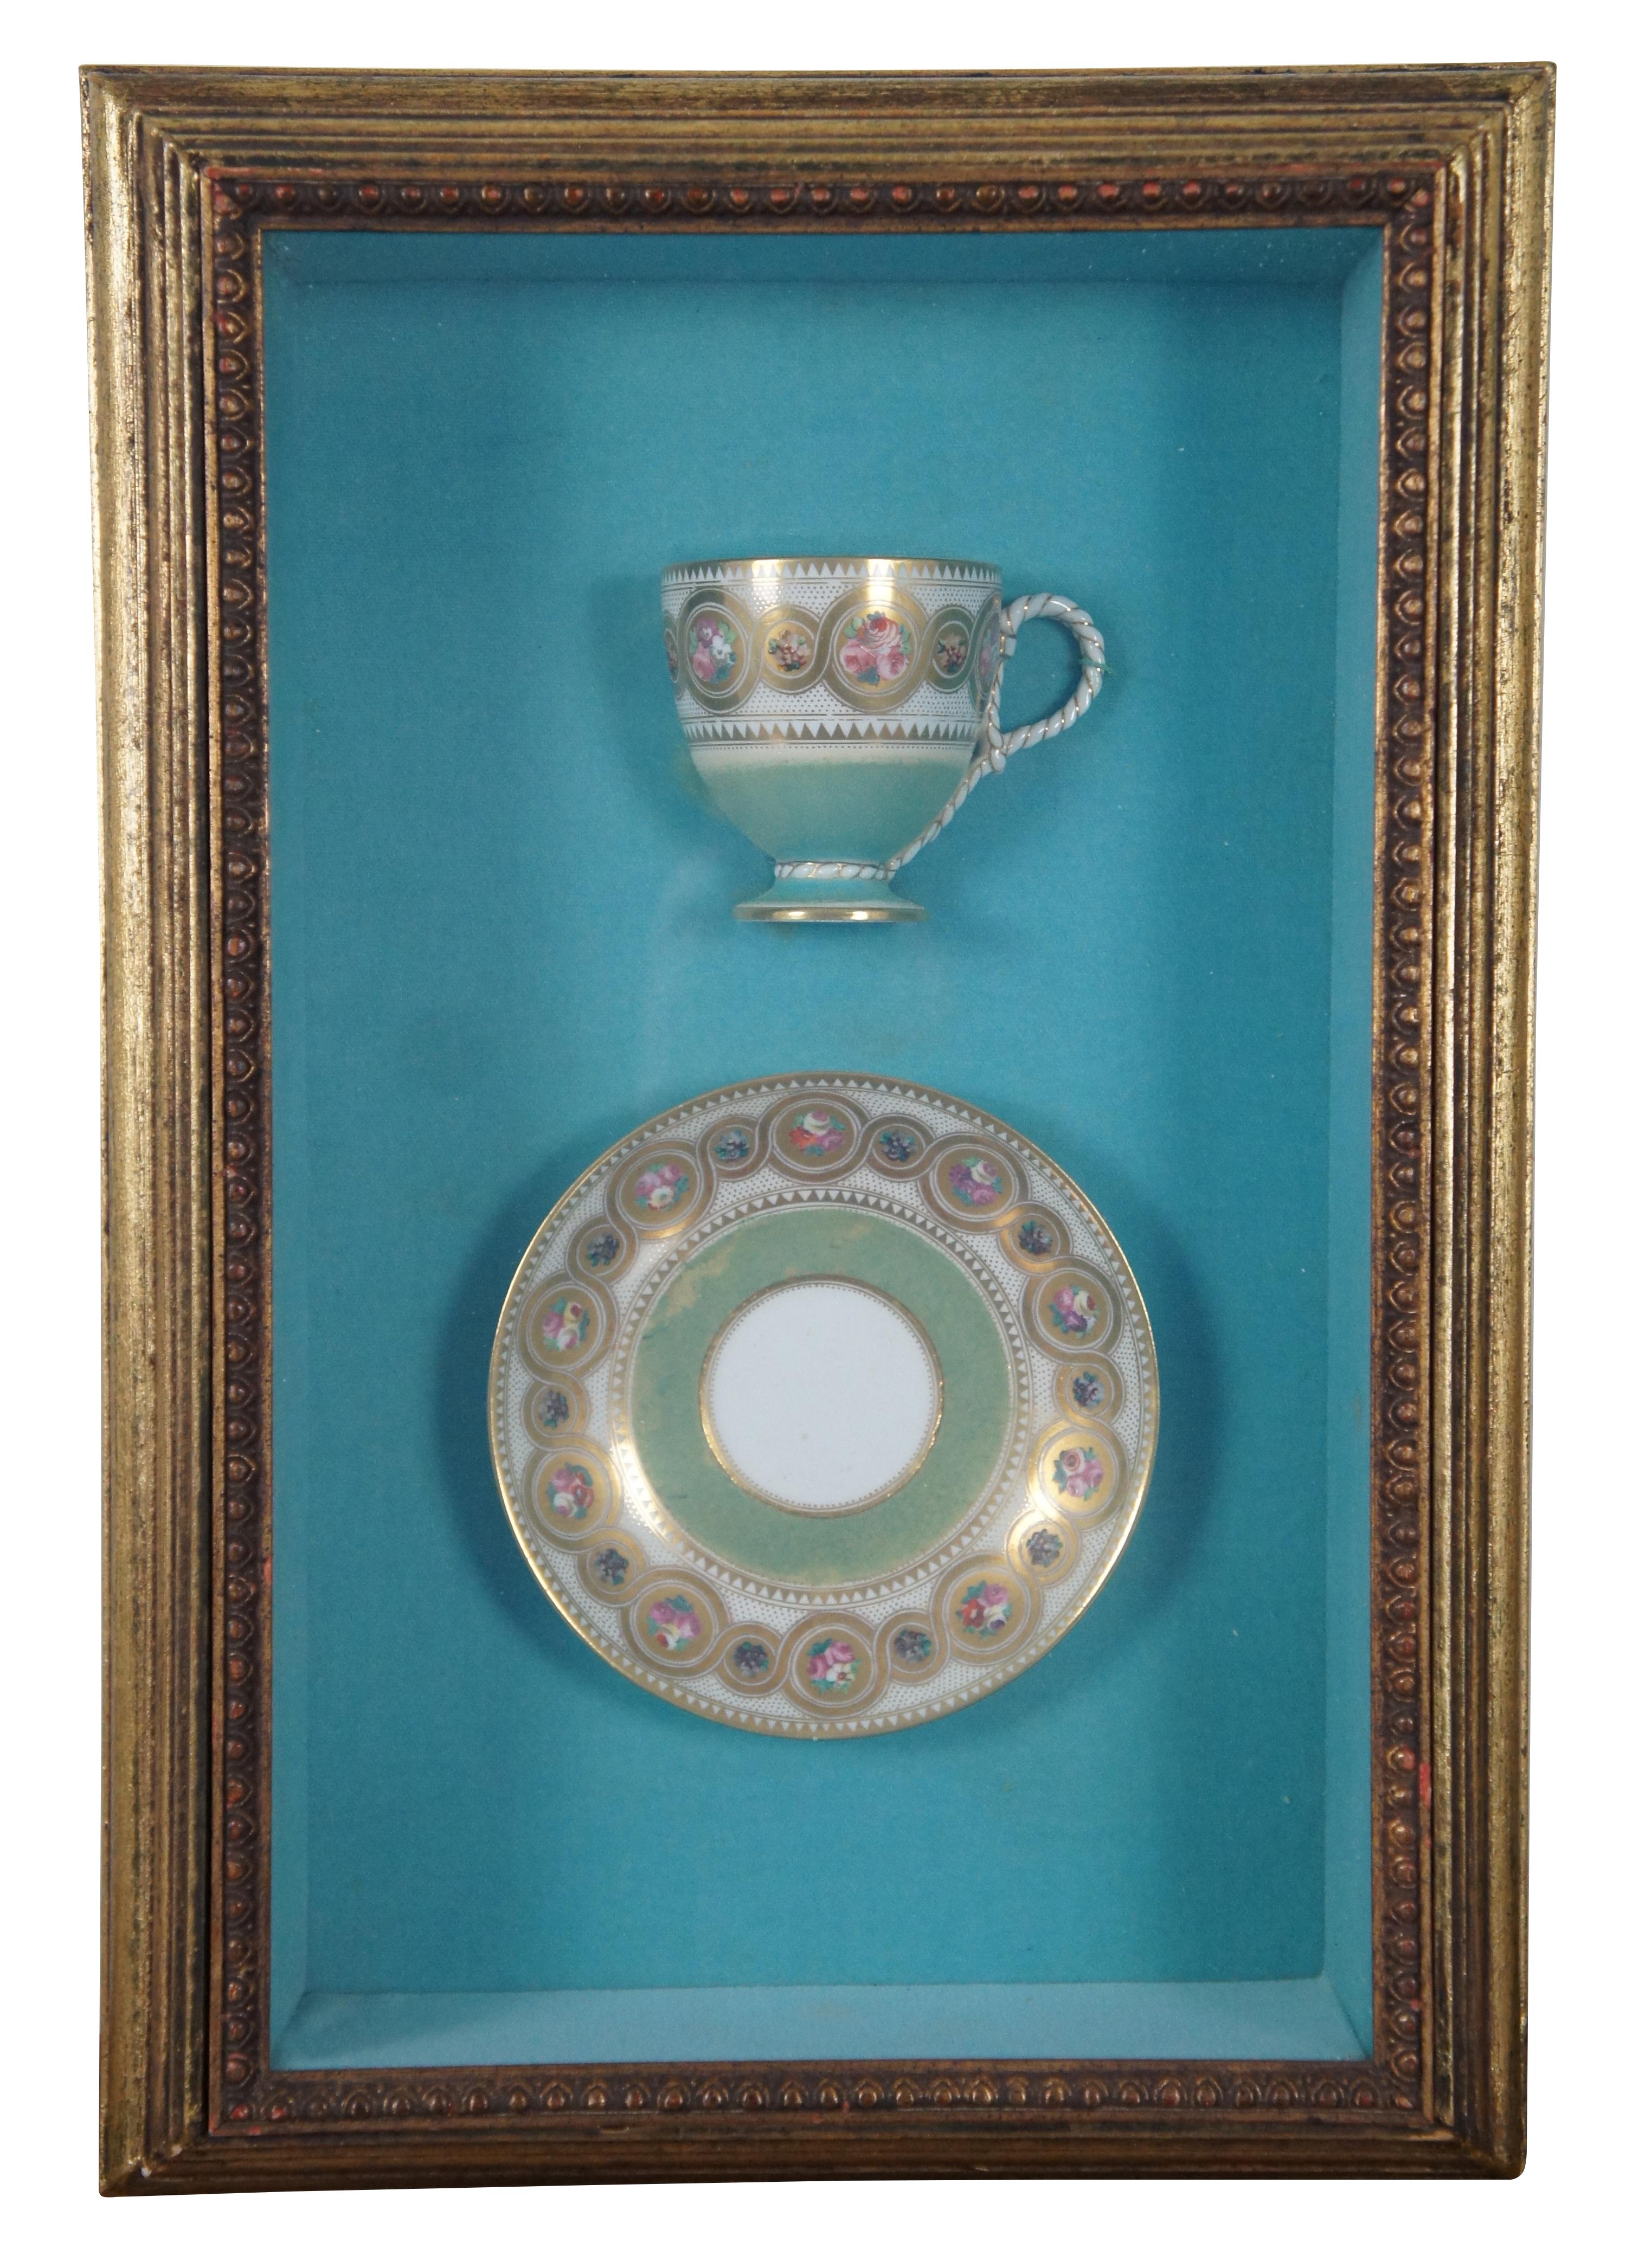 Rare antique Victorian English / British porcelain teacup / saucer and serving plate, painted turquoise, gold, and ringed with flowers and ribbon designs. Mounted in deep multi beveled frame shadowboxes with gold / blue / turquoise and egg and dart